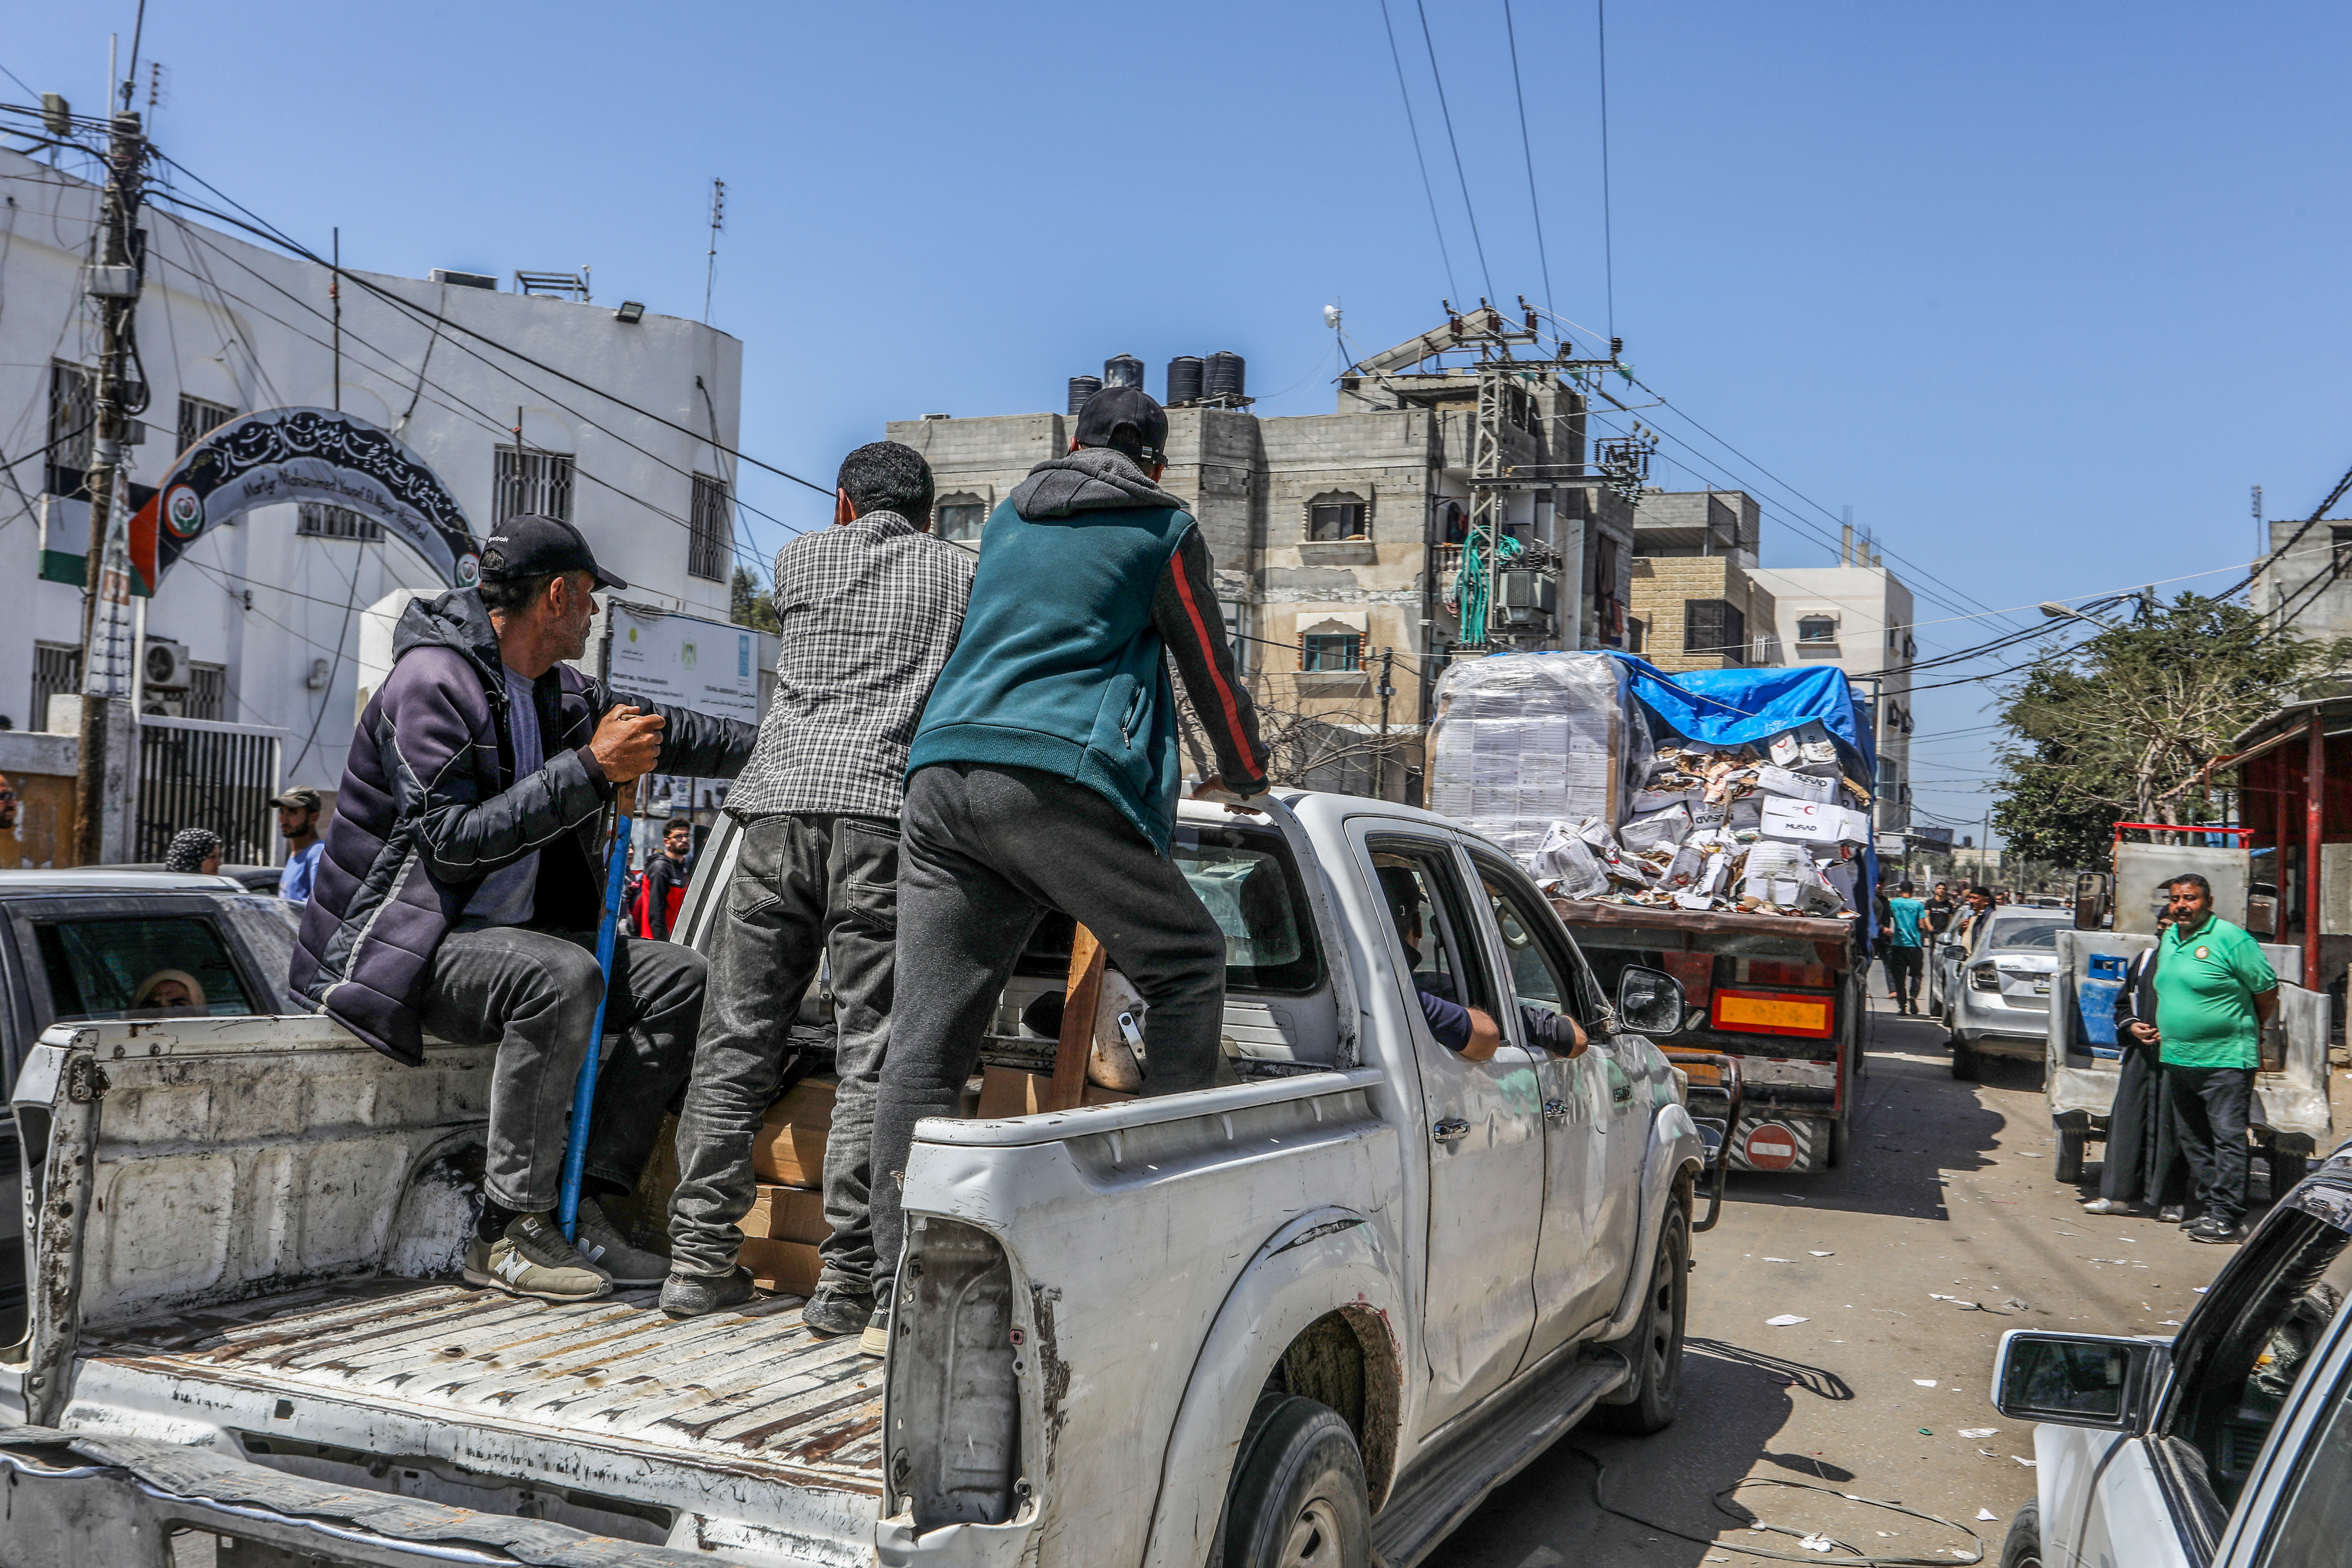 Day 186 - Israel gets aid to Gaza; will allies be appeased?